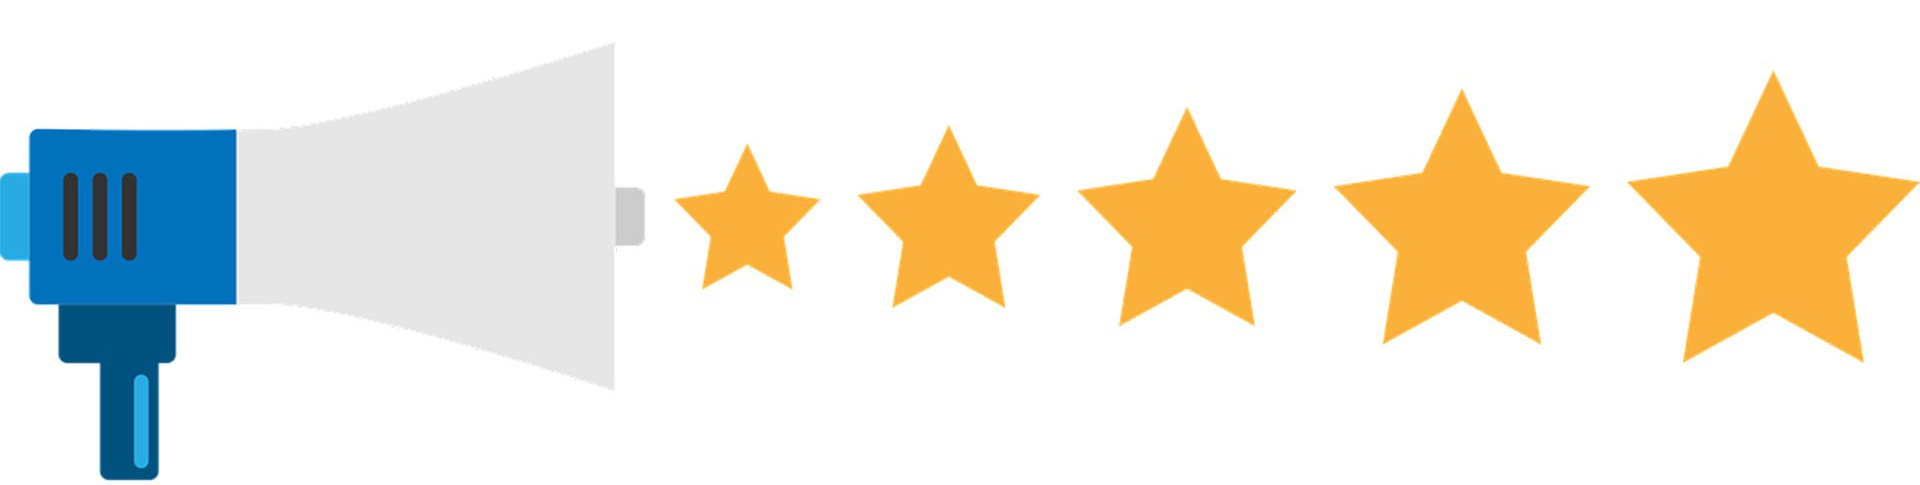 You have more control over online reviews than you may realize.